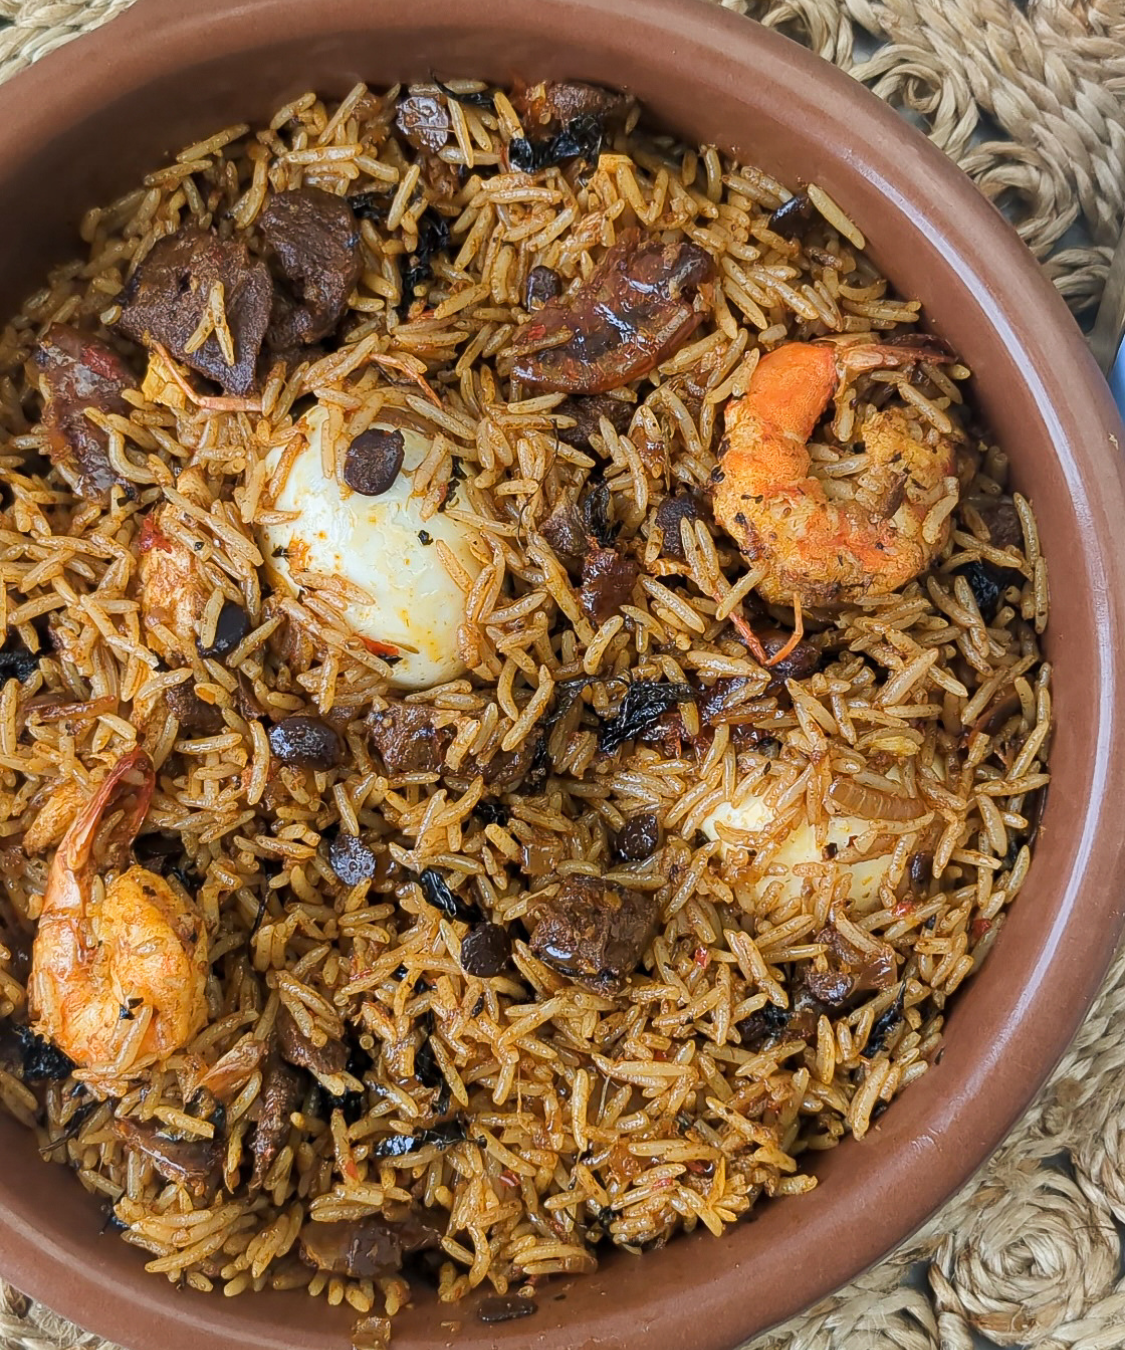 Native Jollof Rice: A Taste of Home with a Twist